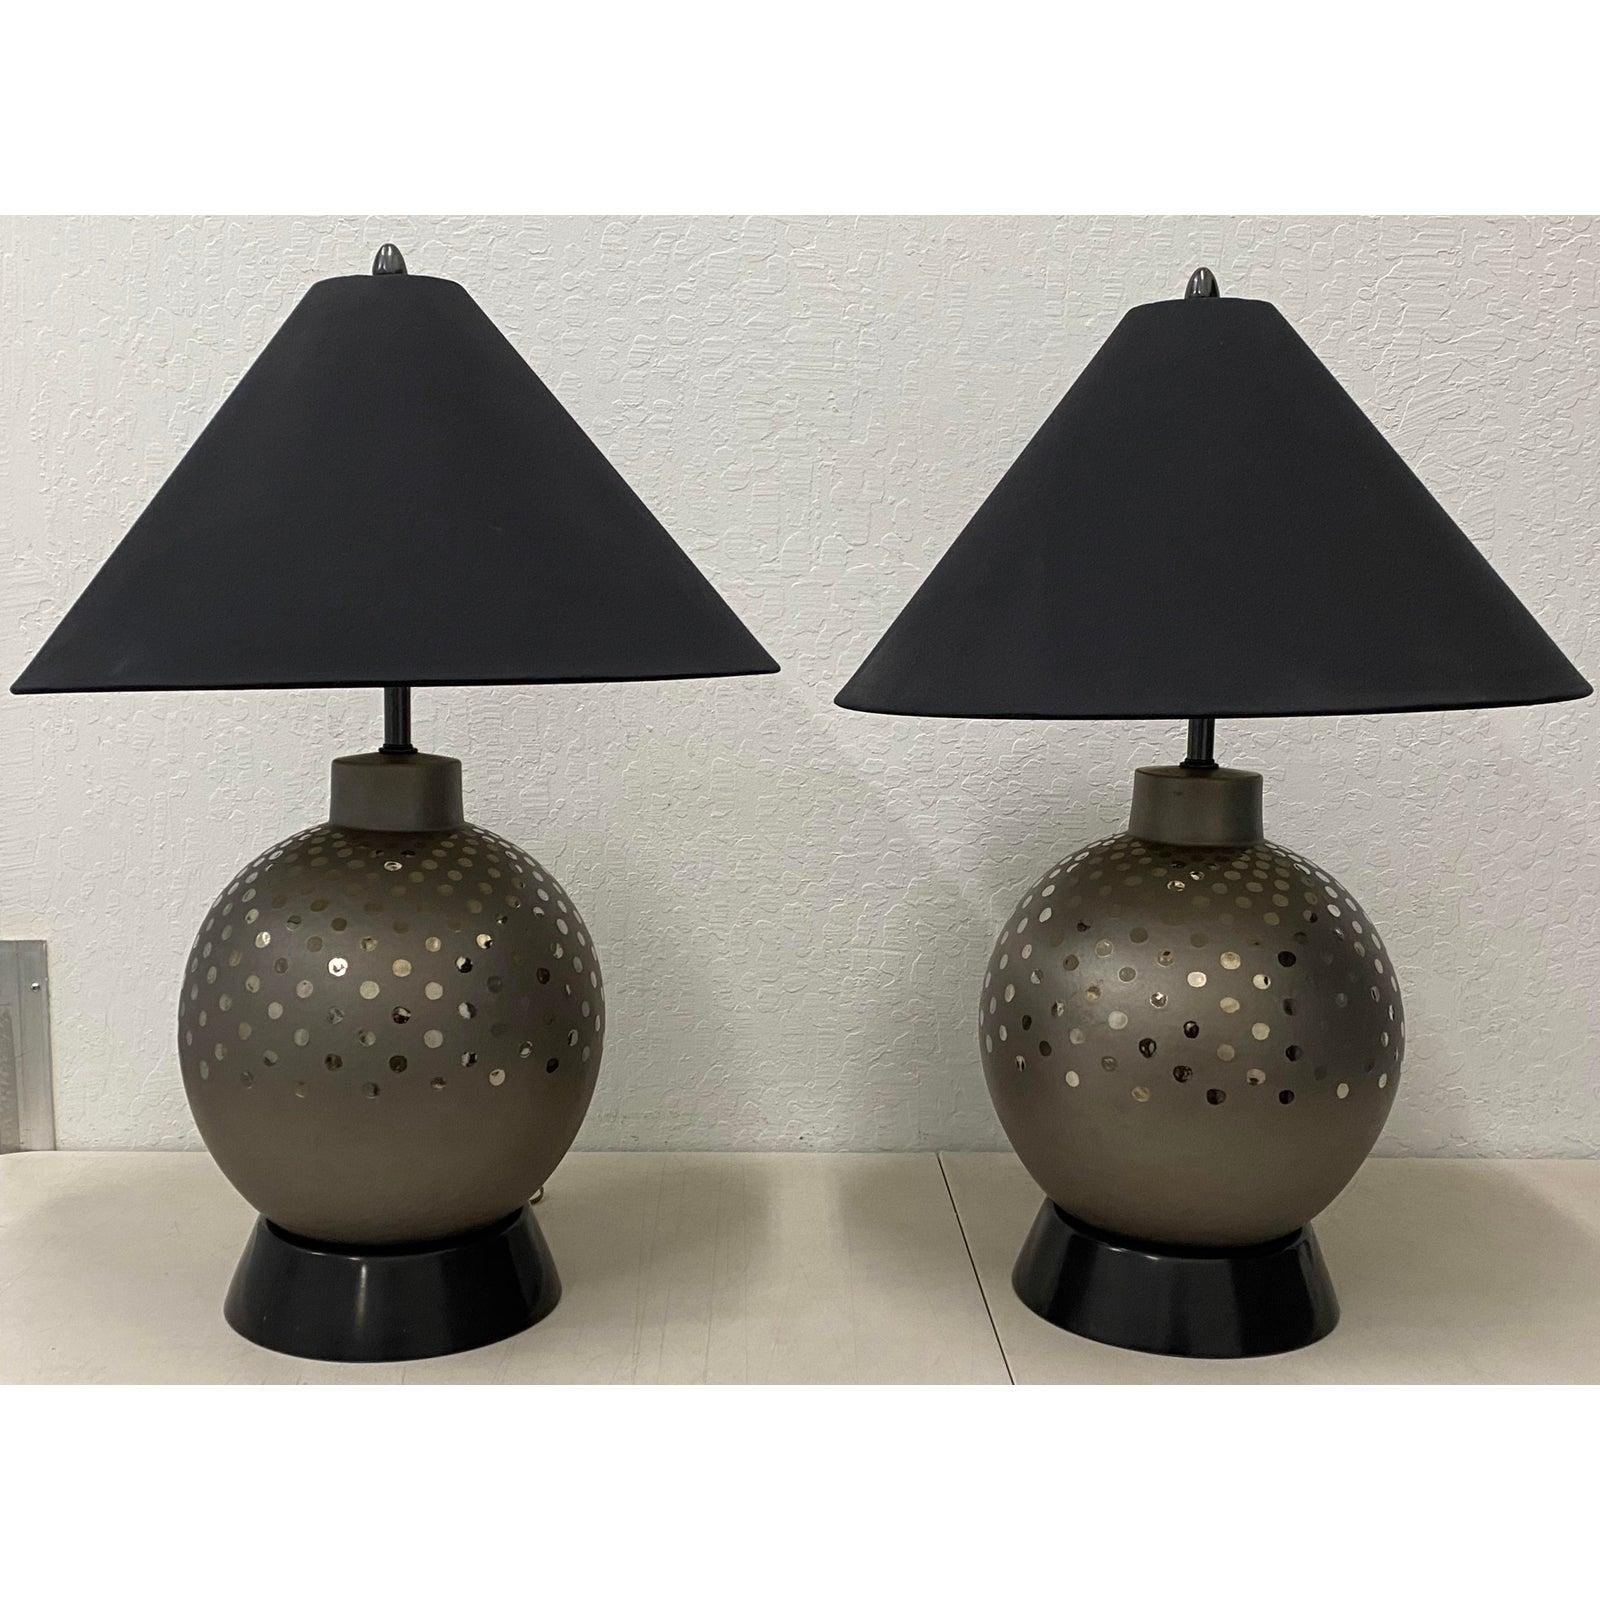 Pair of Vintage Ceramic Metallic Silver Glaze Ball Lamps by Marbro, circa 1970 For Sale 2